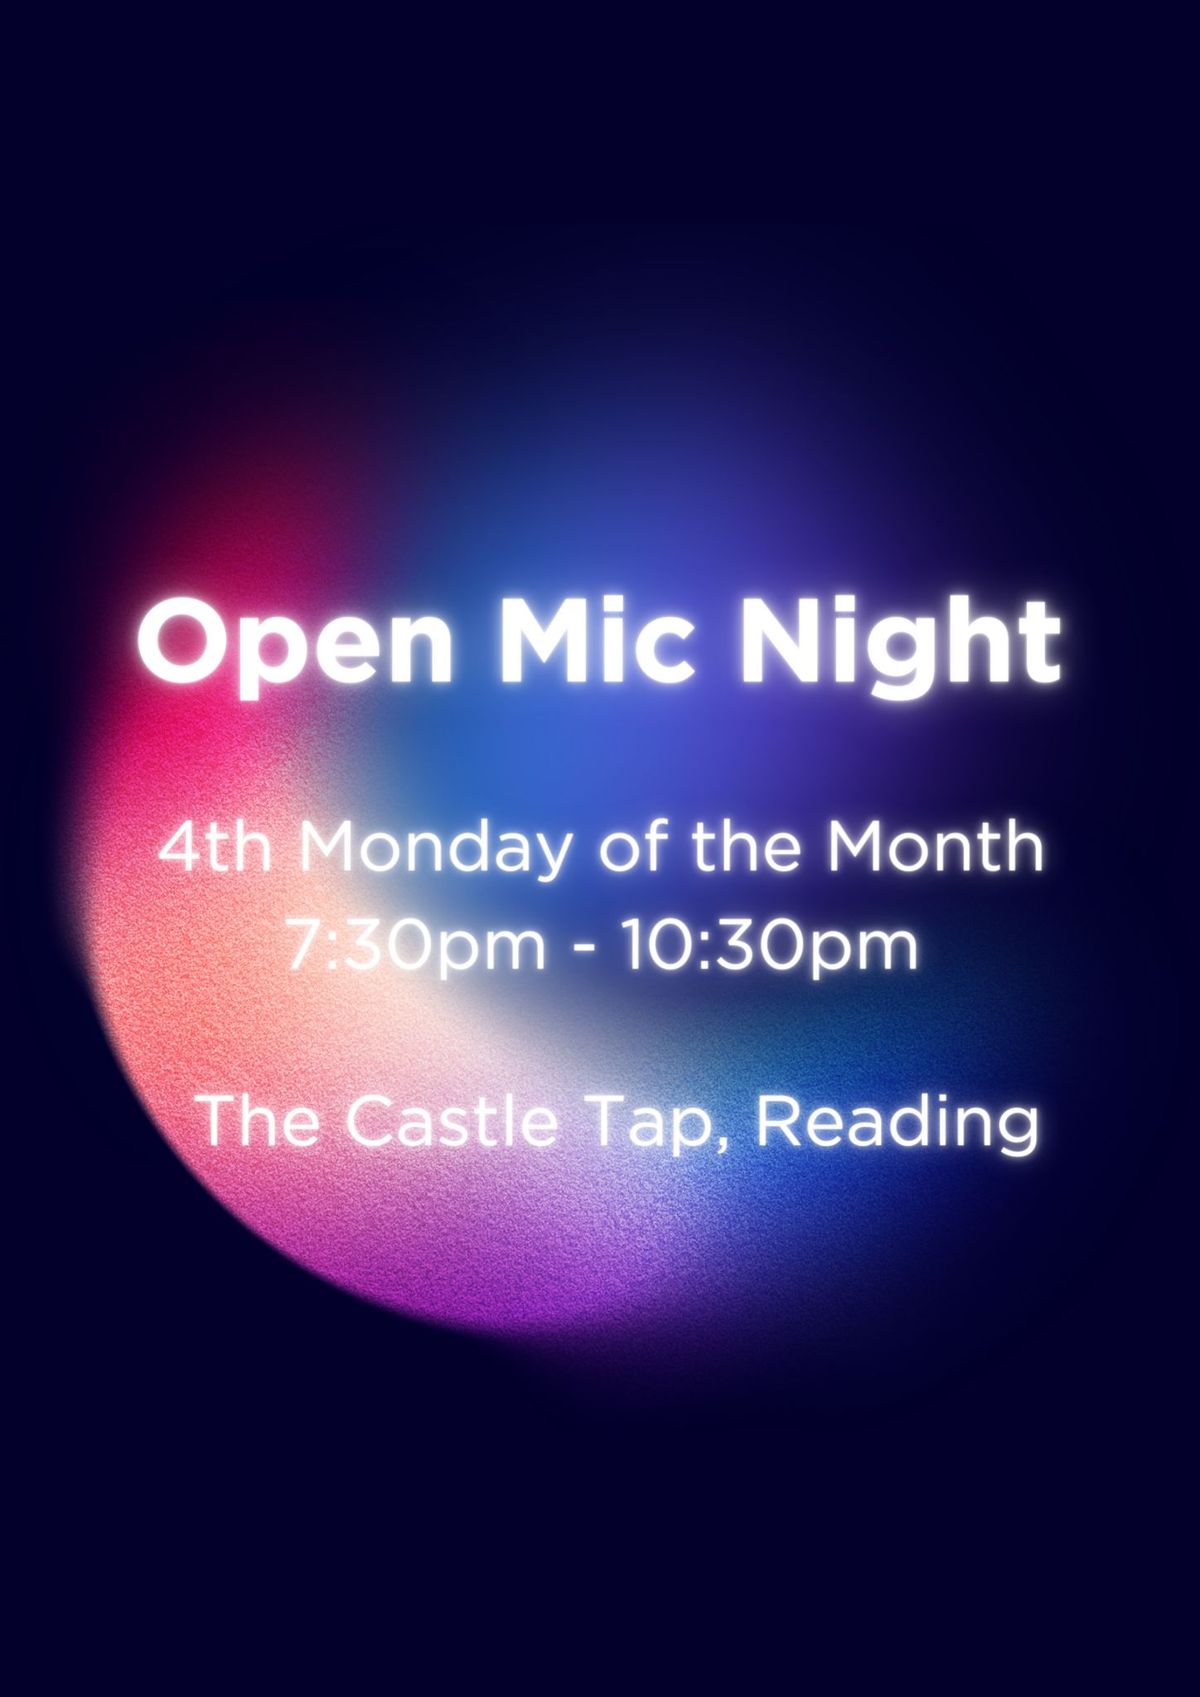 Open Mic Night at The Castle Tap